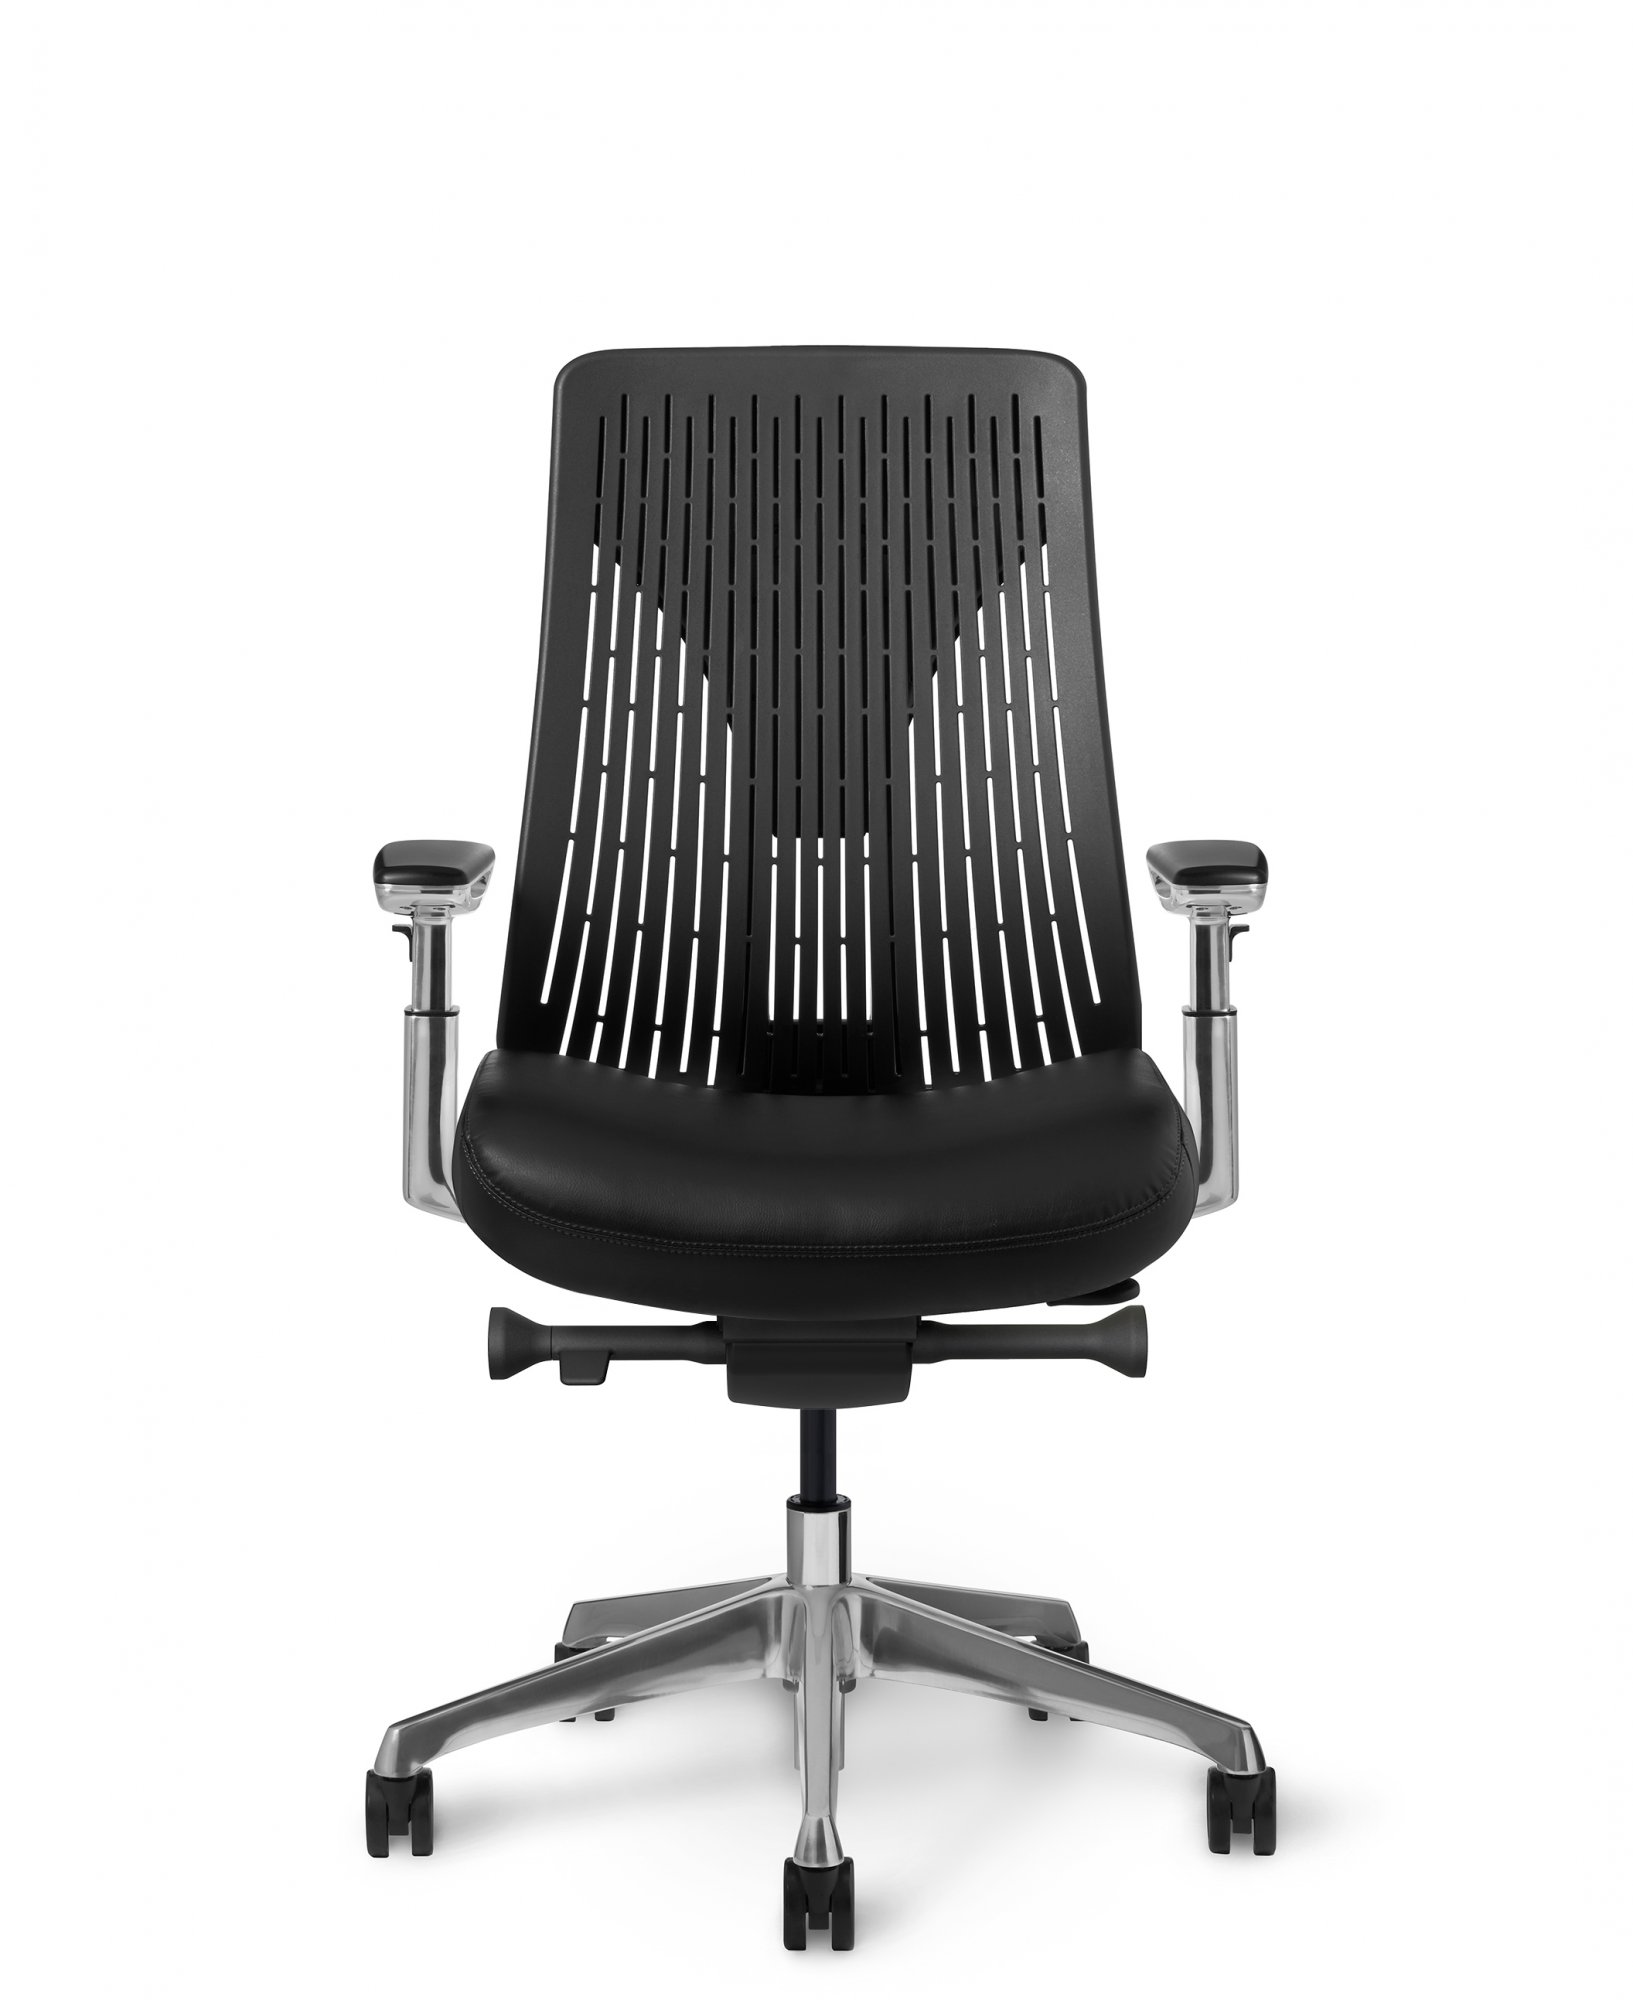 EDC-64A Ergonomic Gaming Chair by OM-Seating